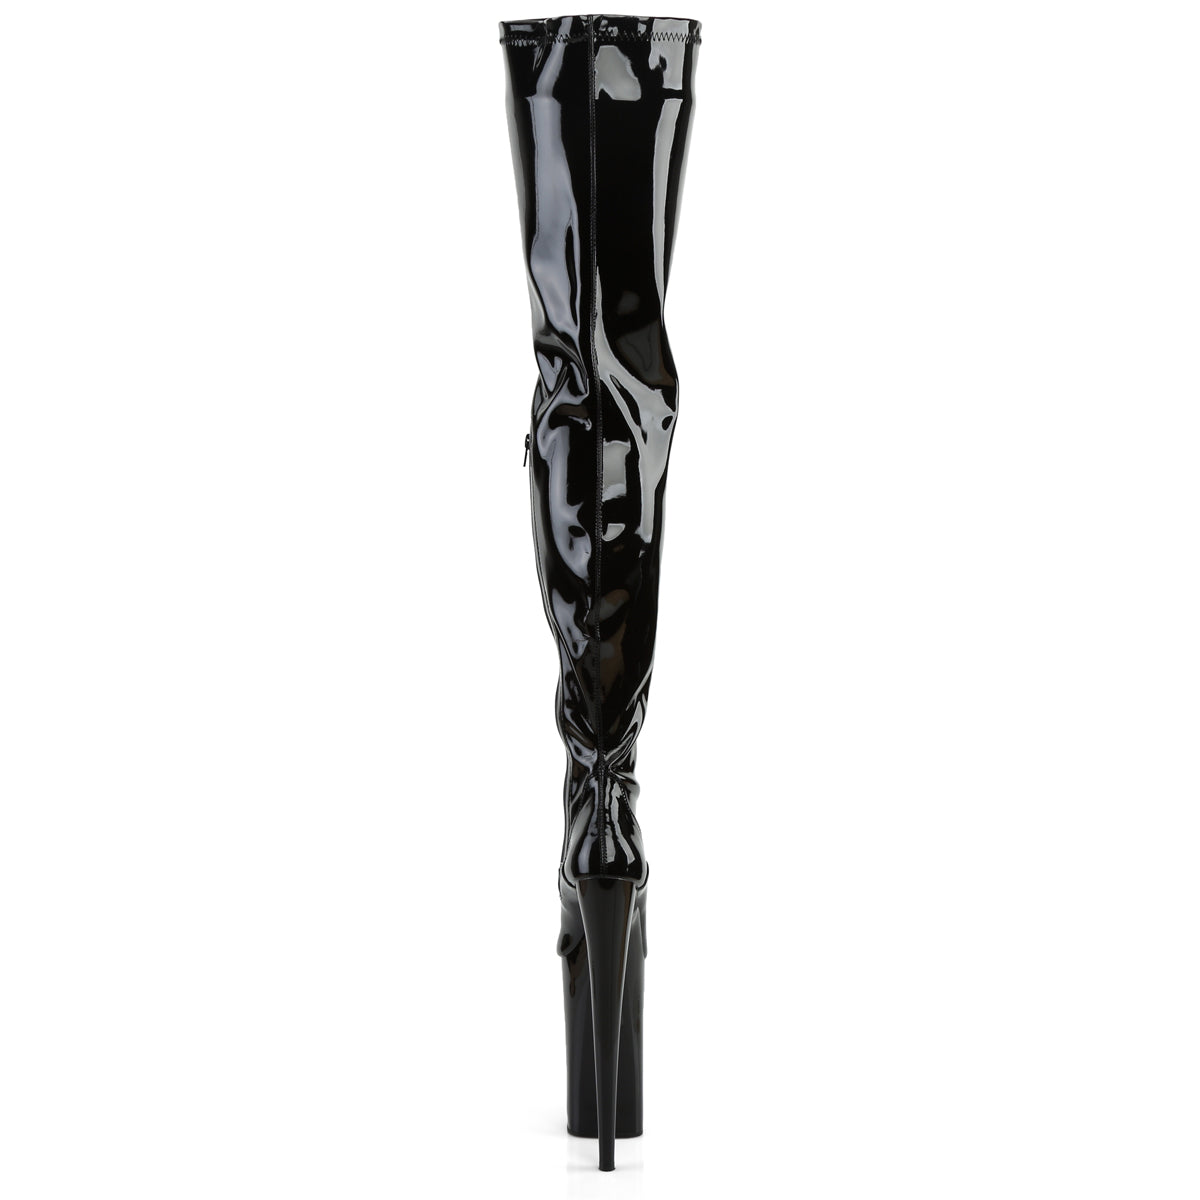 BEYOND-4000 Sexy 10" Heel Black Patent Strippers Boots-Pleaser- Sexy Shoes Fetish Footwear